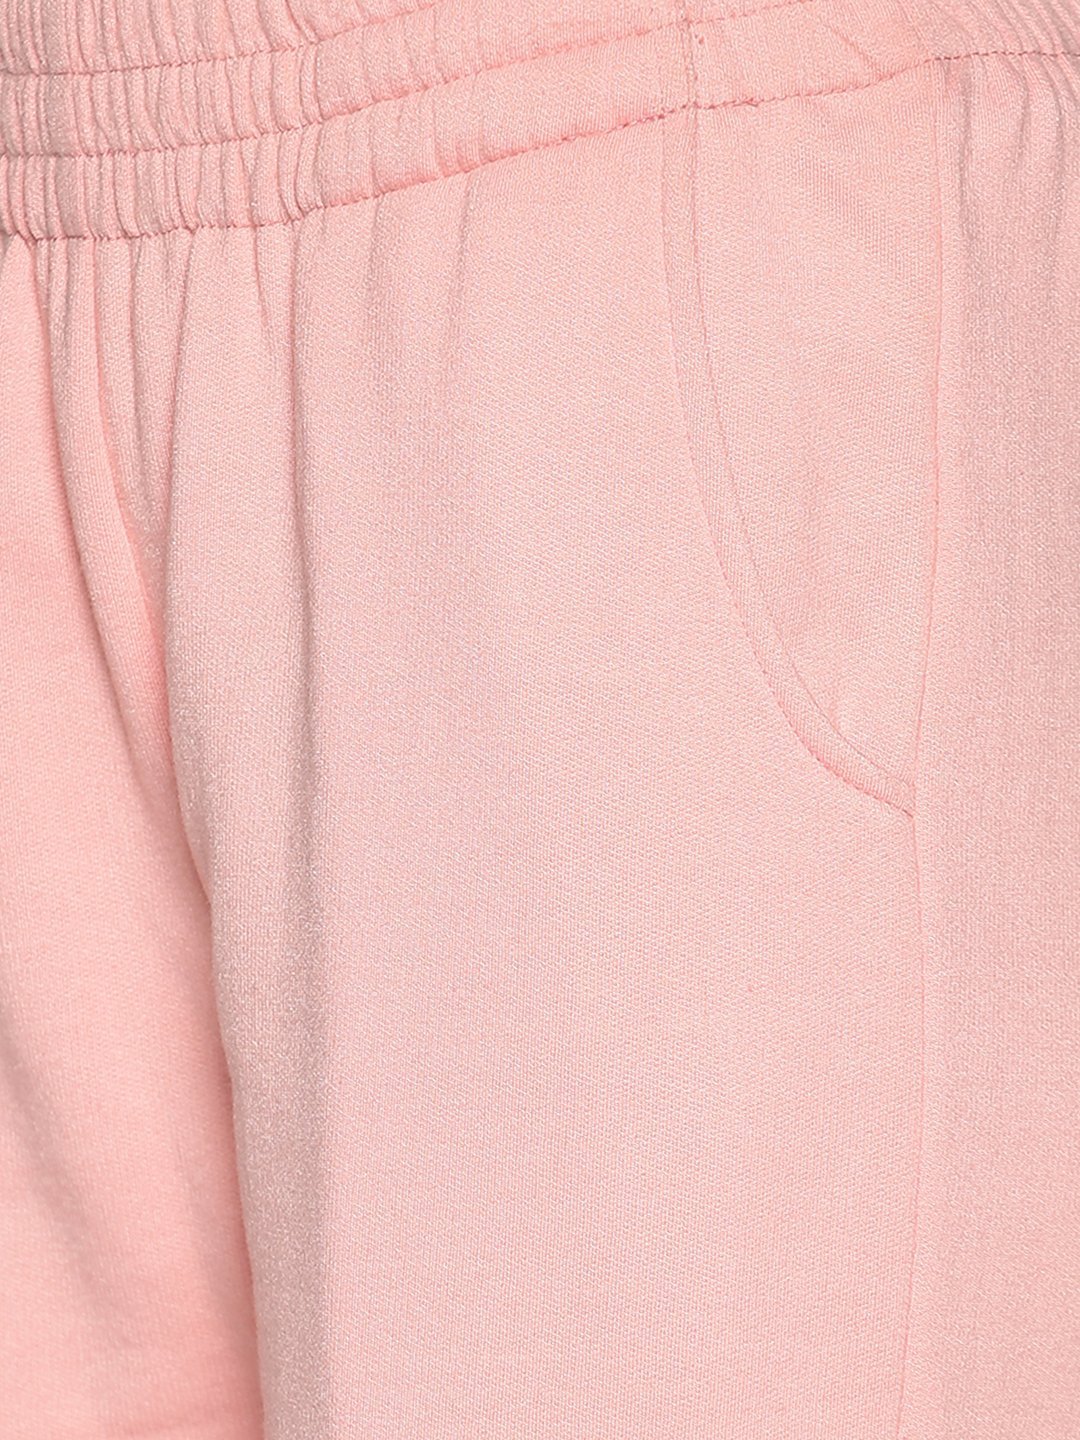 IS.U Pink Relaxed Fit Joggers